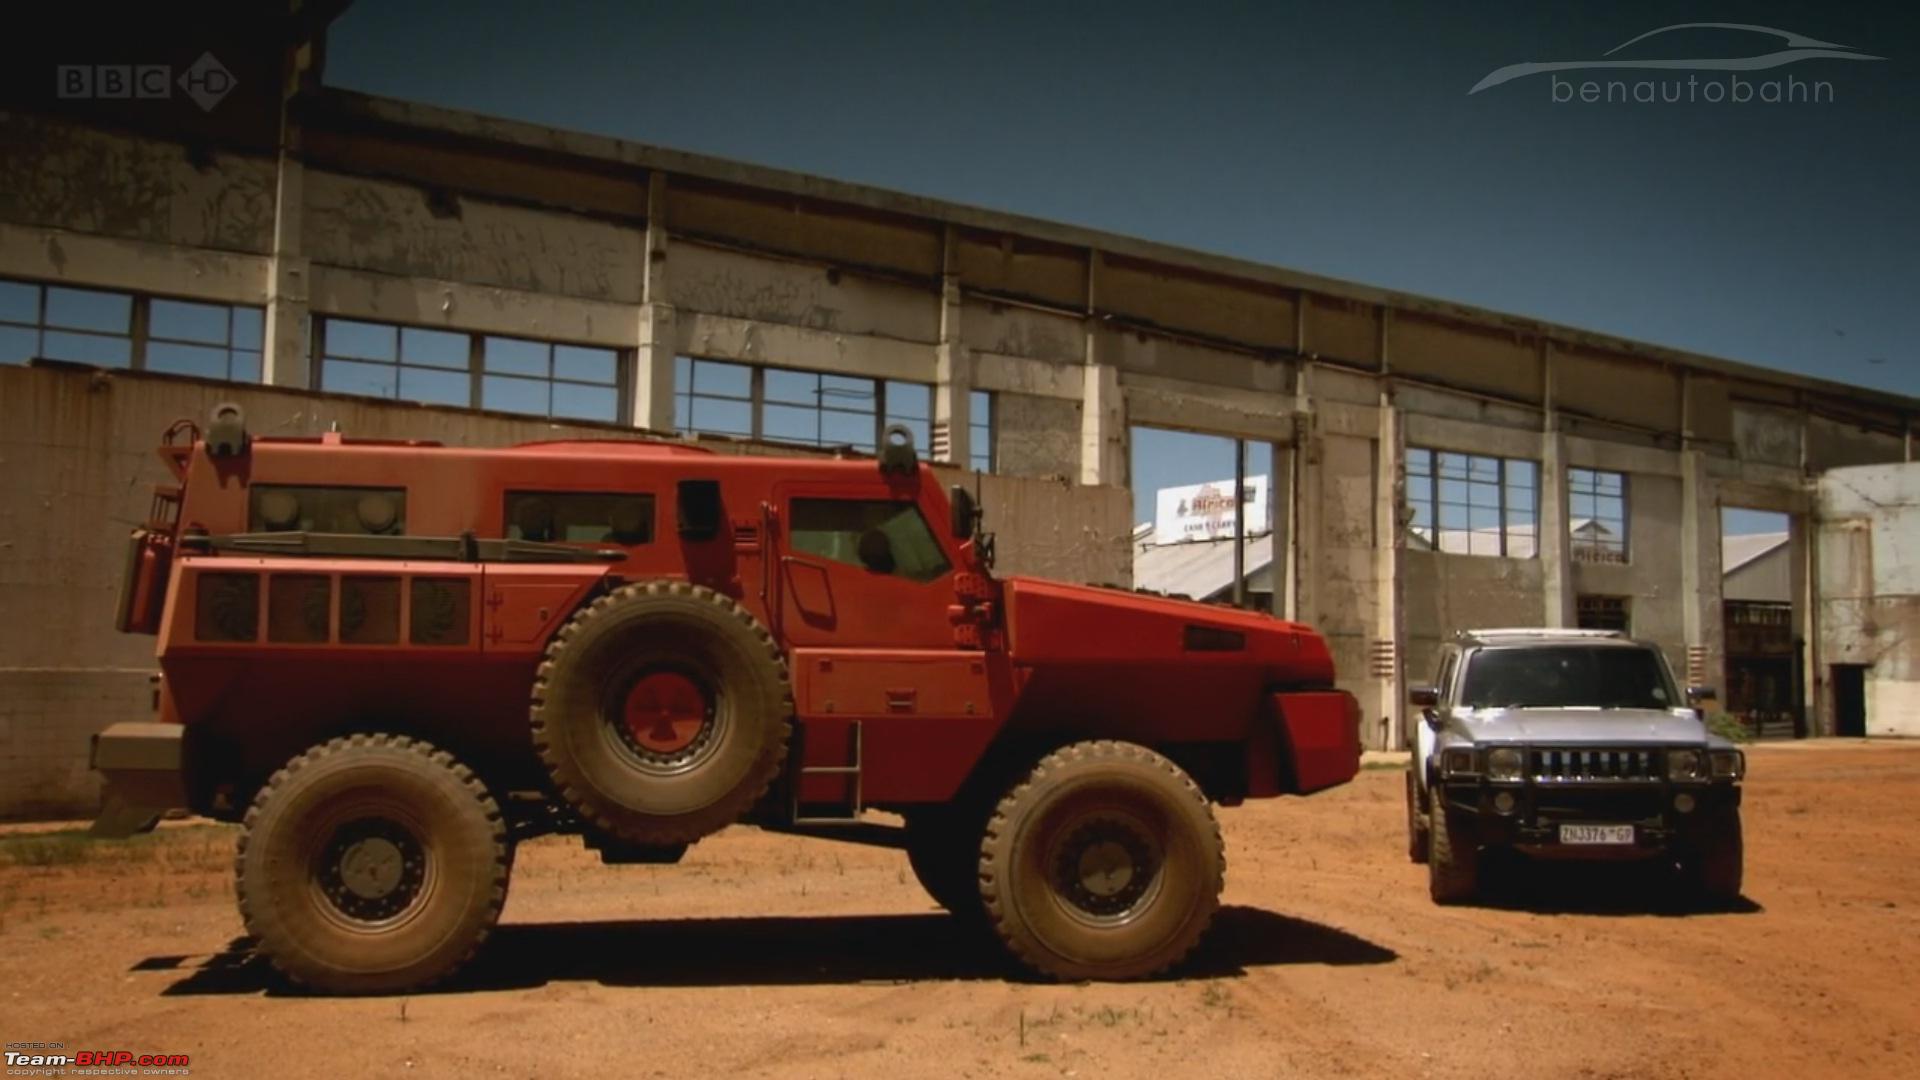 Marauder armored vehicle featured in Top Gear [video]